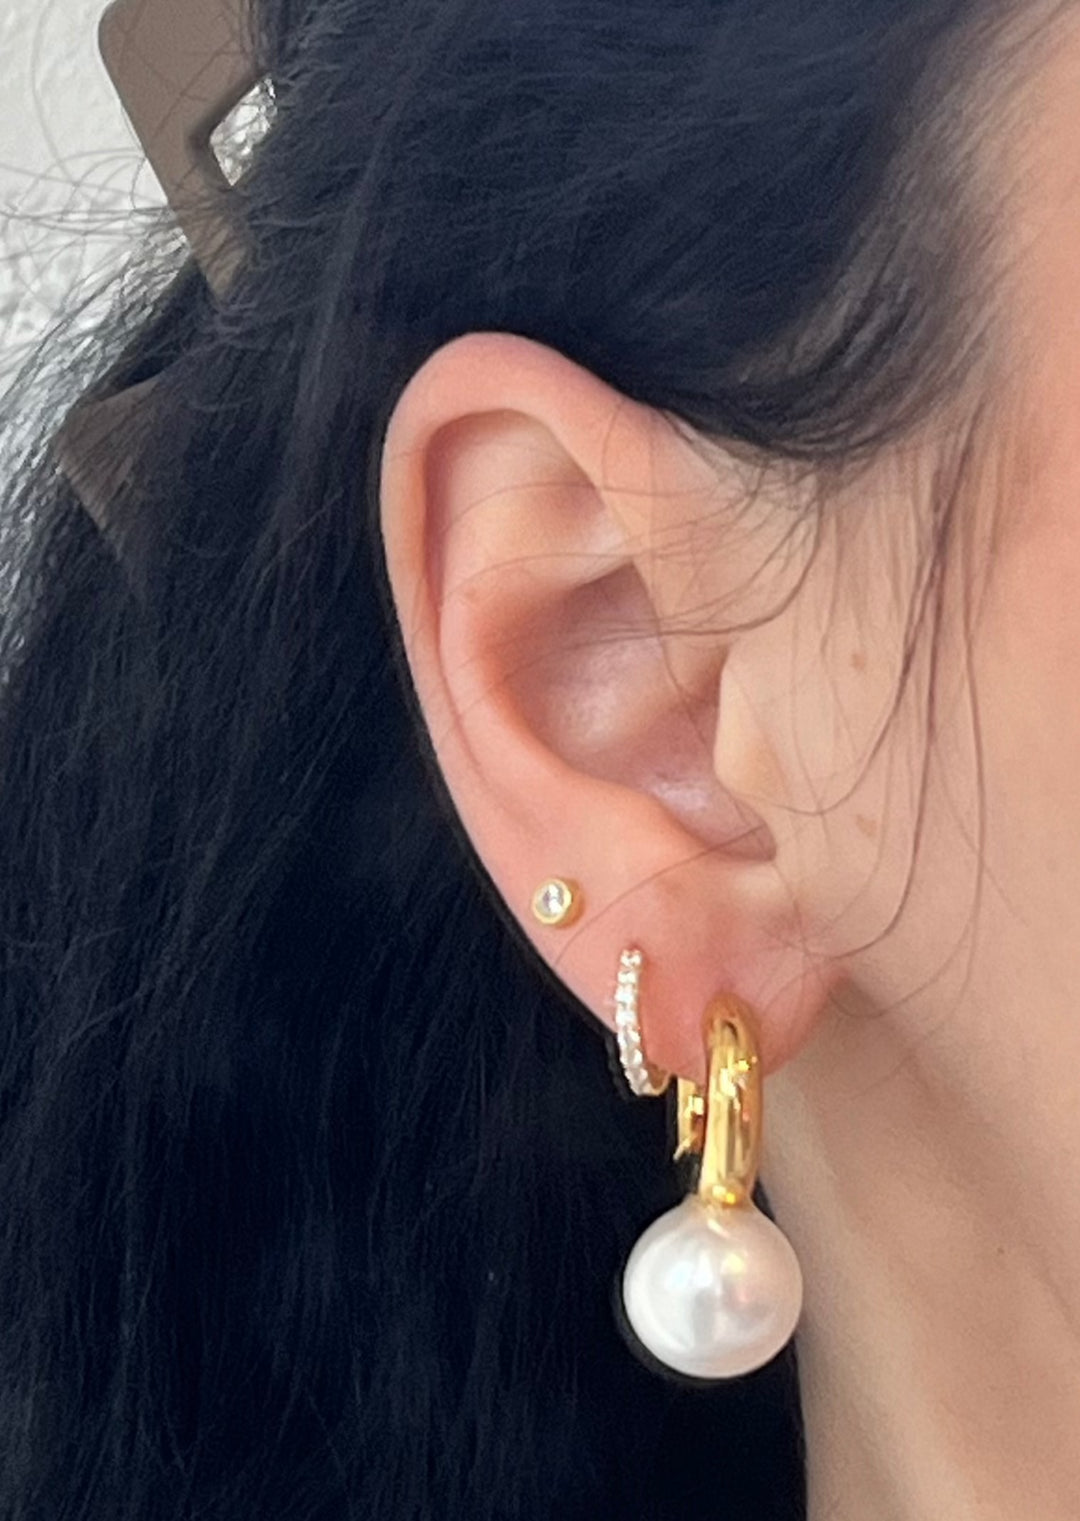 14K Gold Dipped Big Pearl Hoop Earring, Jewelry, Adeline, Adeline, dallas boutique, dallas texas, texas boutique, women's boutique dallas, adeline boutique, dallas boutique, trendy boutique, affordable boutique